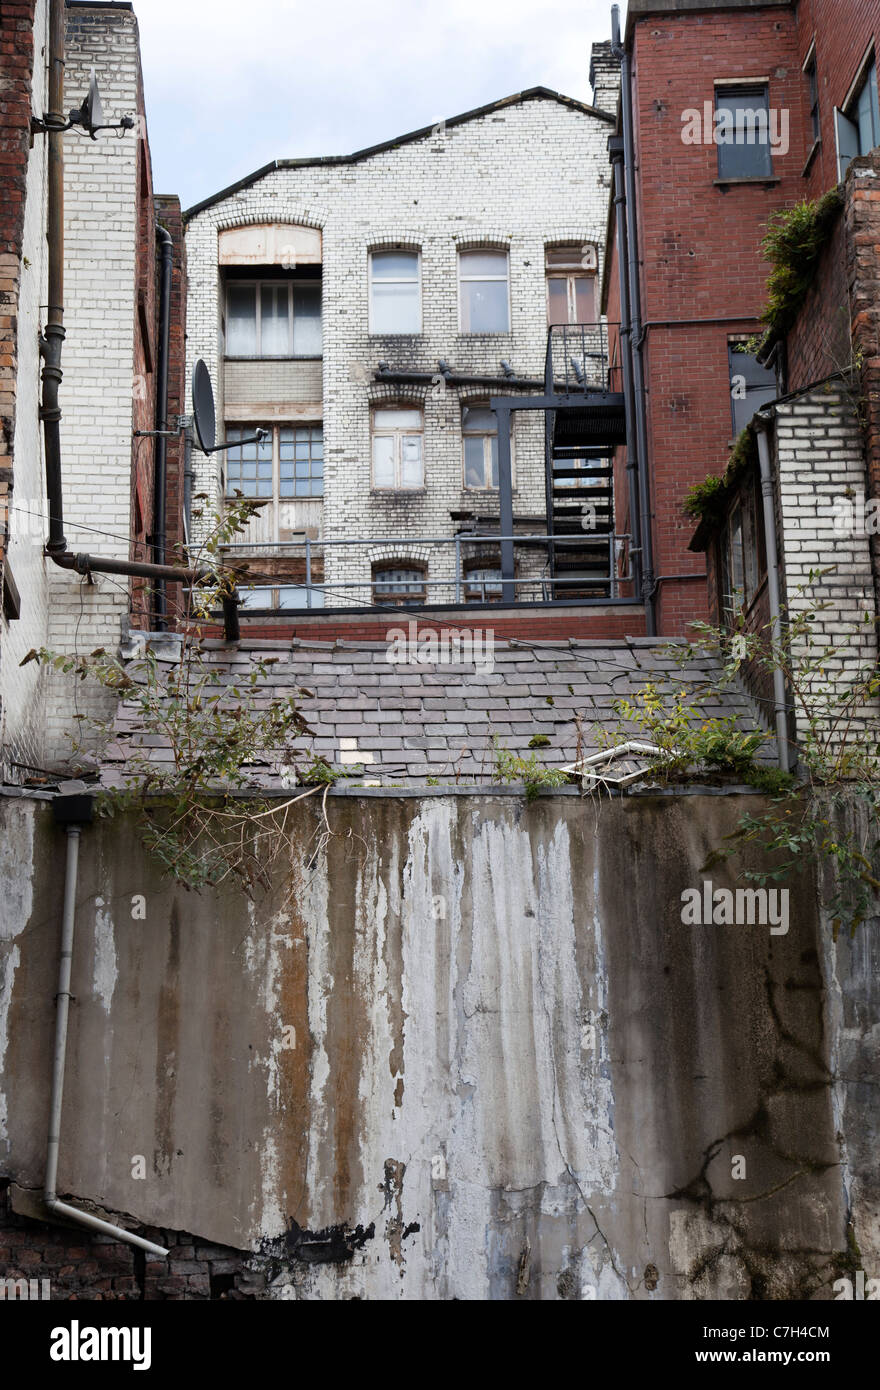 Abandon house in Liverpool city center, Empty , Derelict, Old Stock Photo